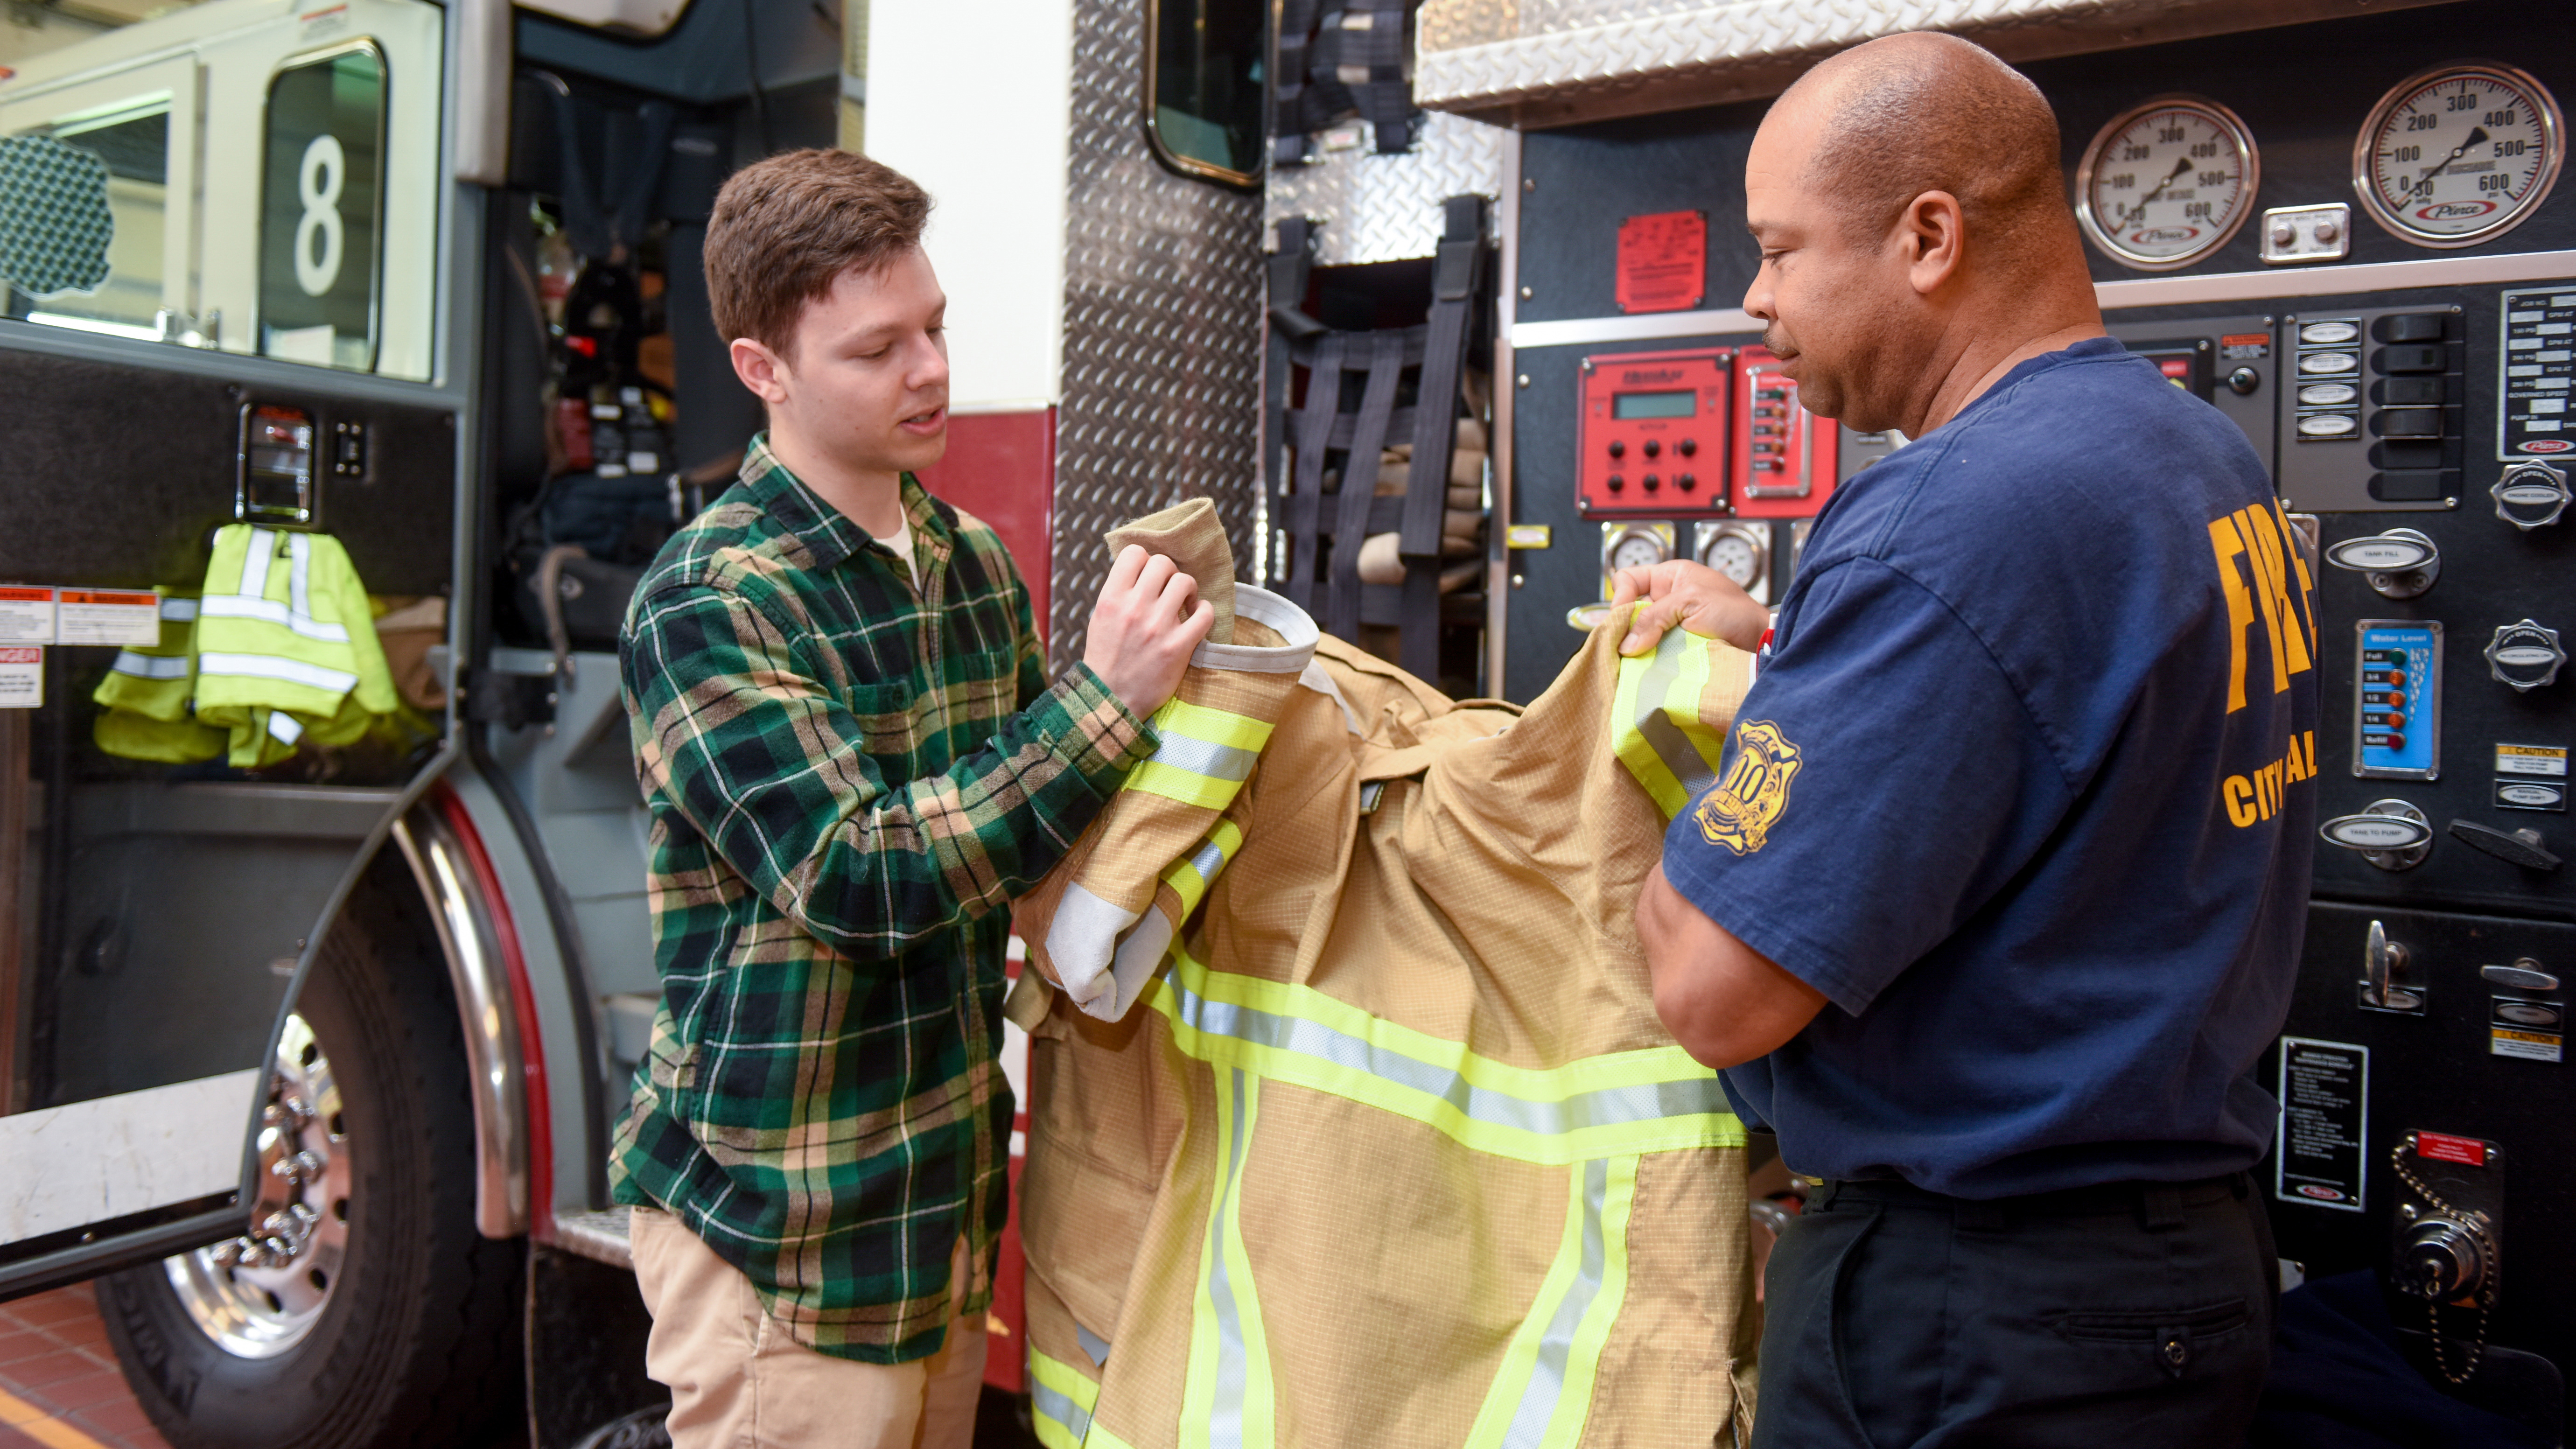 NC State Textiles student looks at gear with Raleigh firefighter